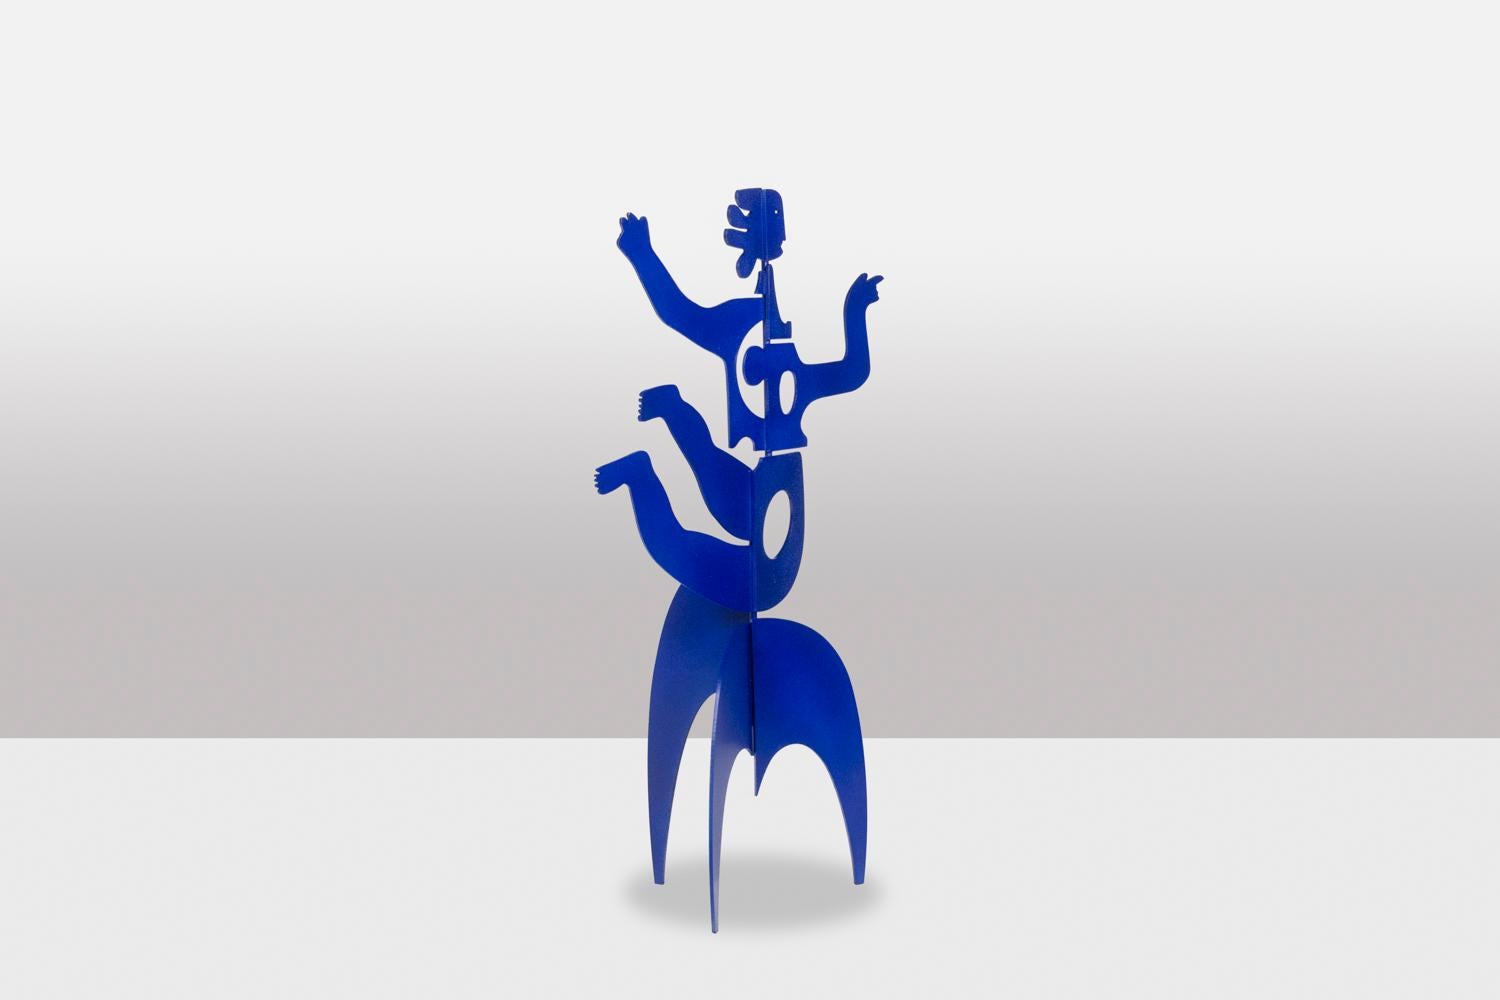 Standing or stabile sculpture, “Eva” model, in lacquered metal in Klein blue or ultramarine color.

Contemporary French work of artist, signed and numbered.

Reference: LS5900309I